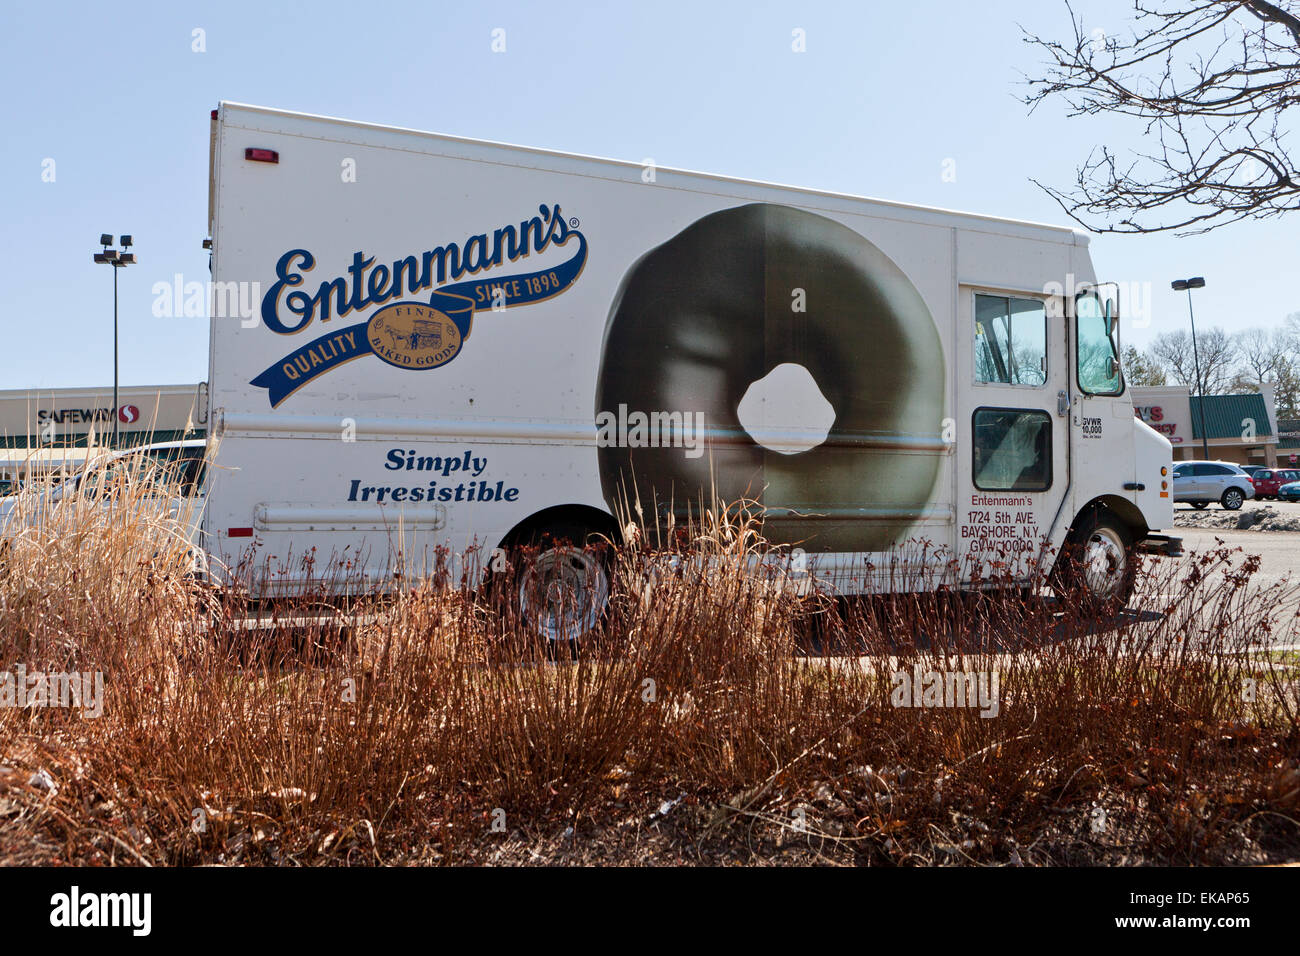 Entenmann's baked goods delivery truck at supermarket - USA Stock Photo